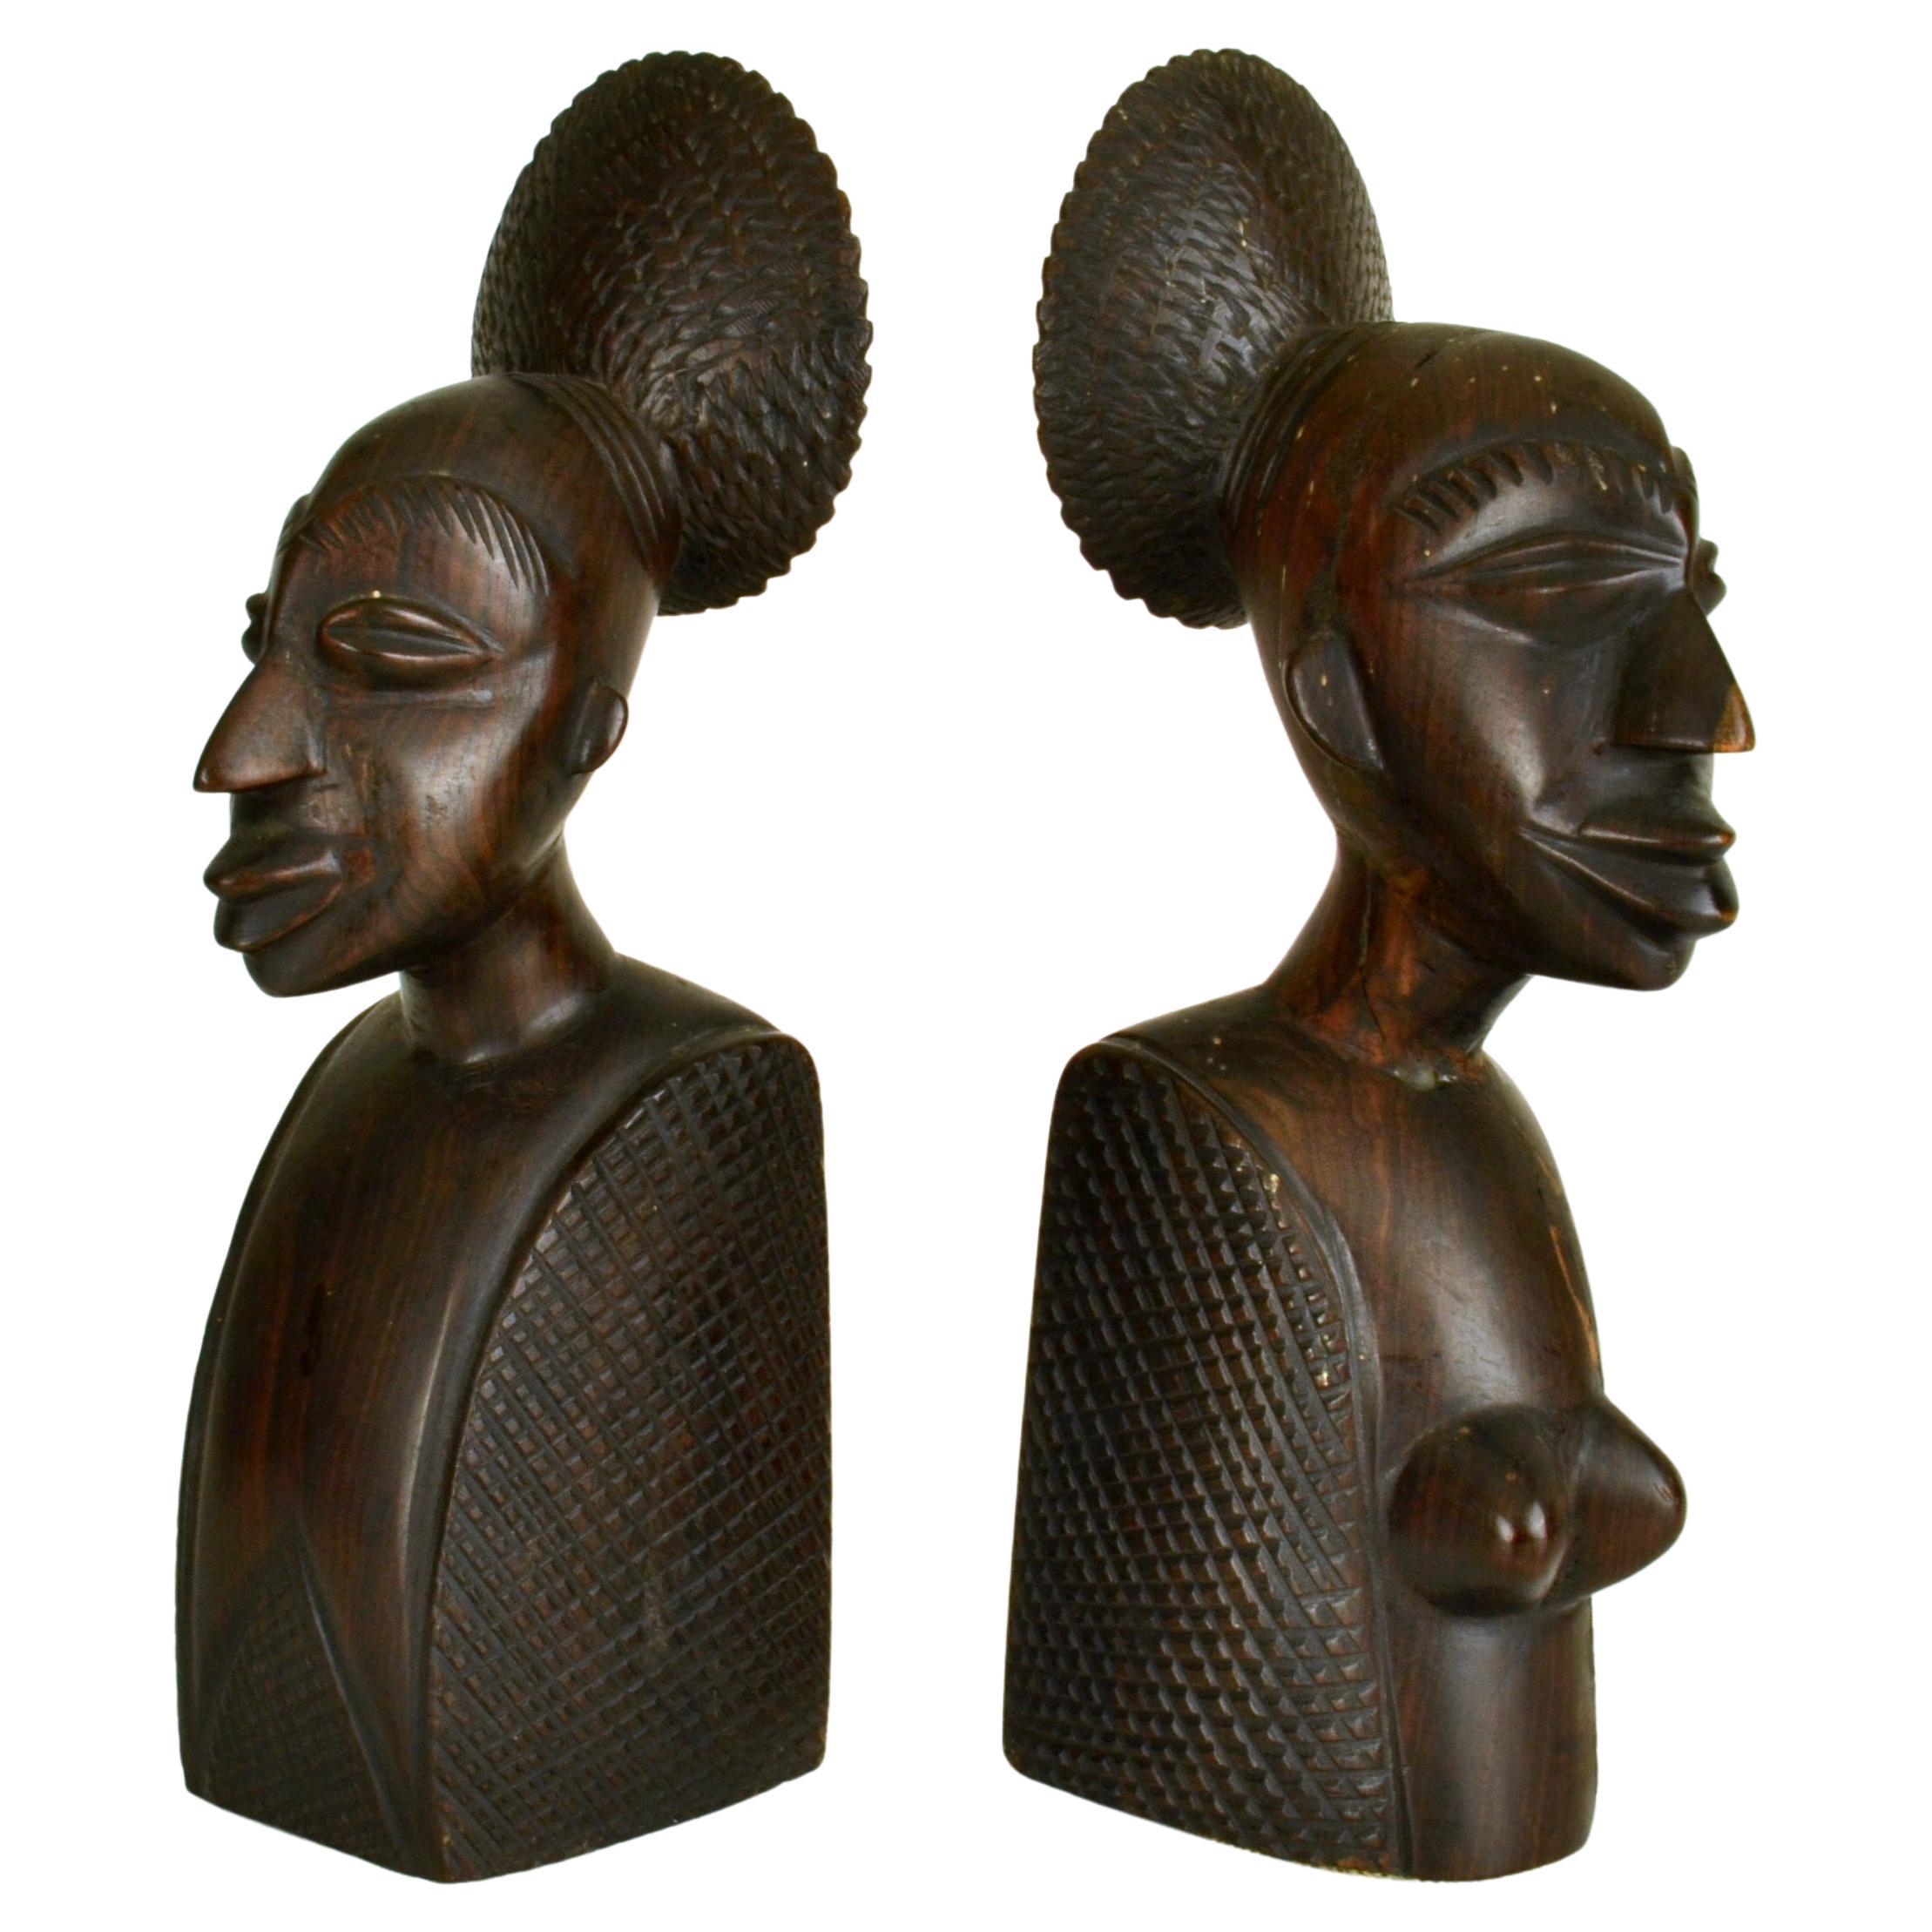 Pair of Figurative African Bookends Carved in Hardwood